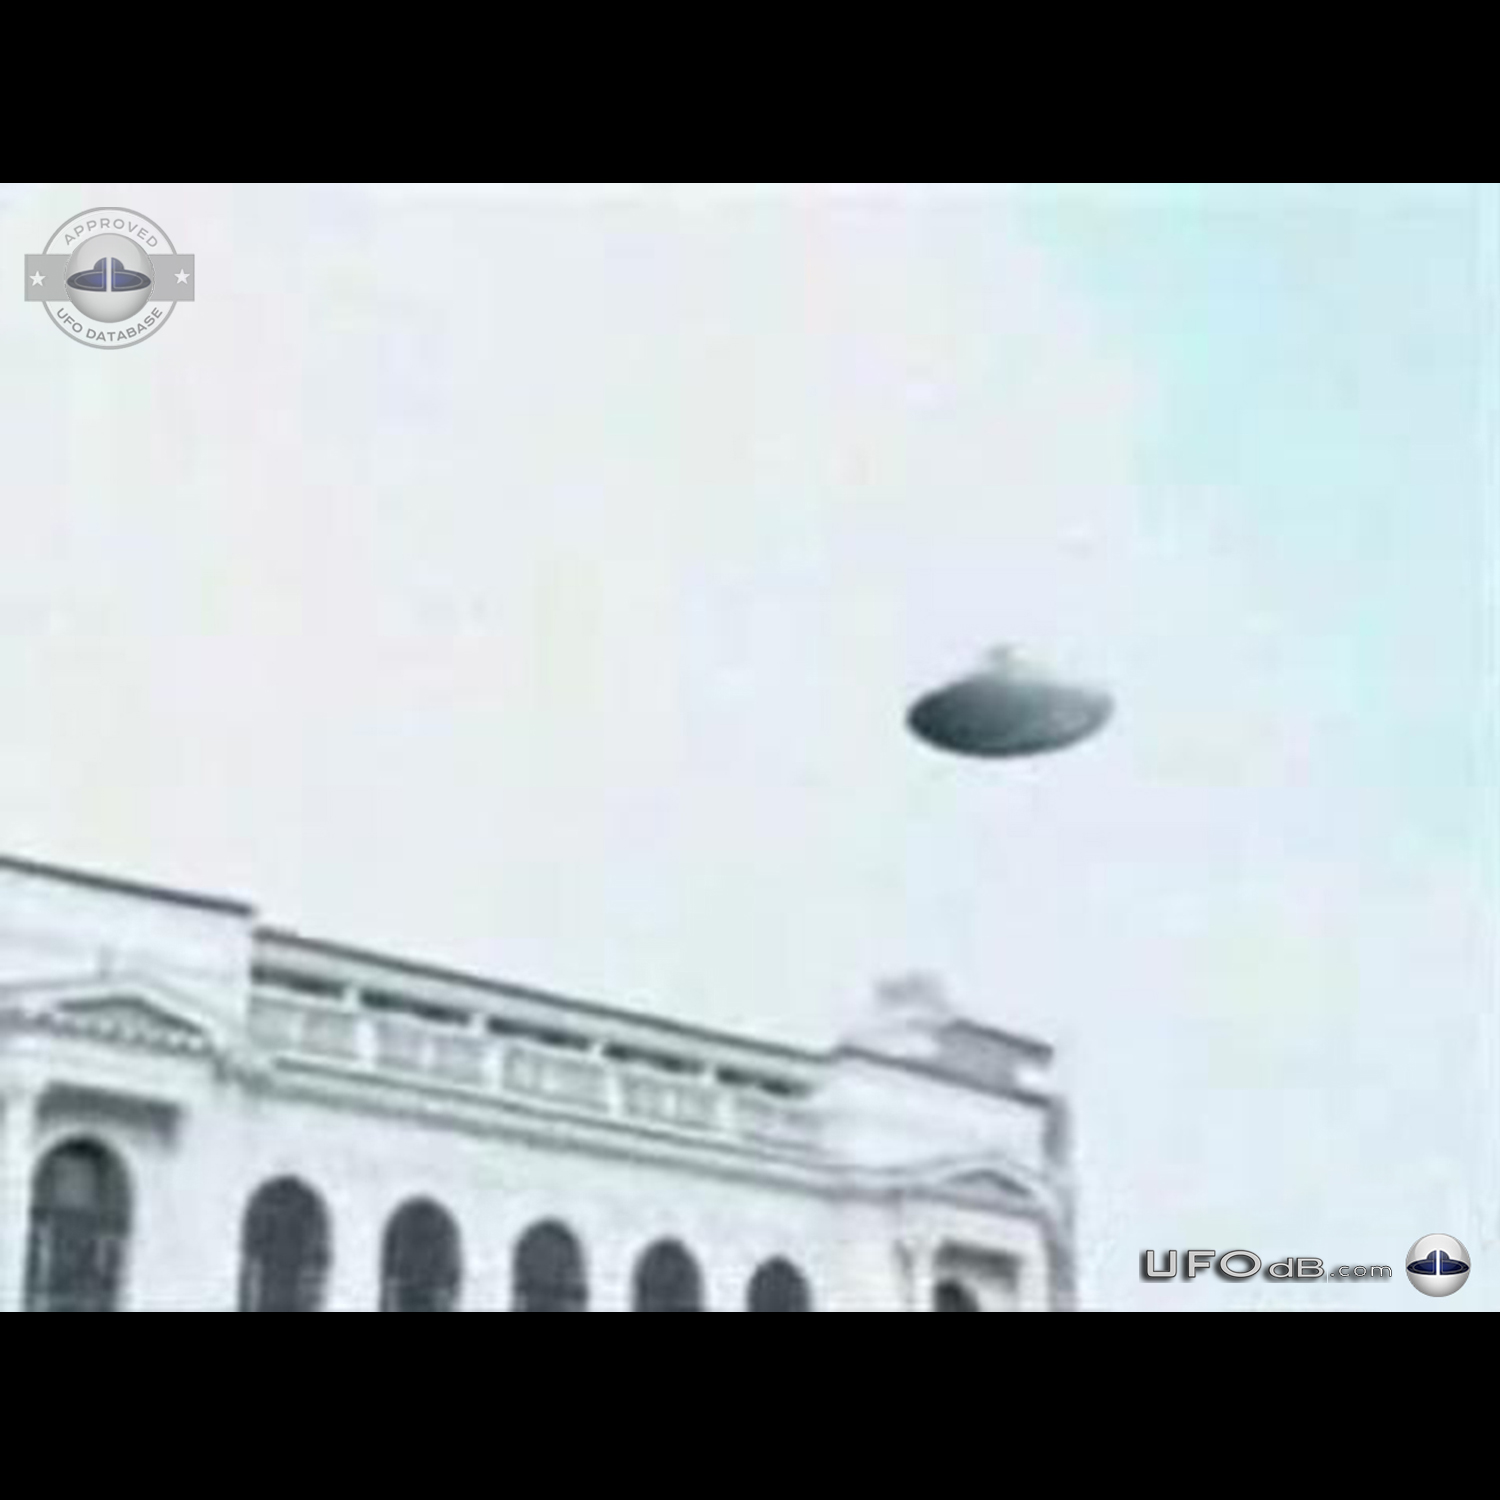 Picture from Video of UFO near Nanjing, Jiangsu in China from 2006 UFO Picture #706-1